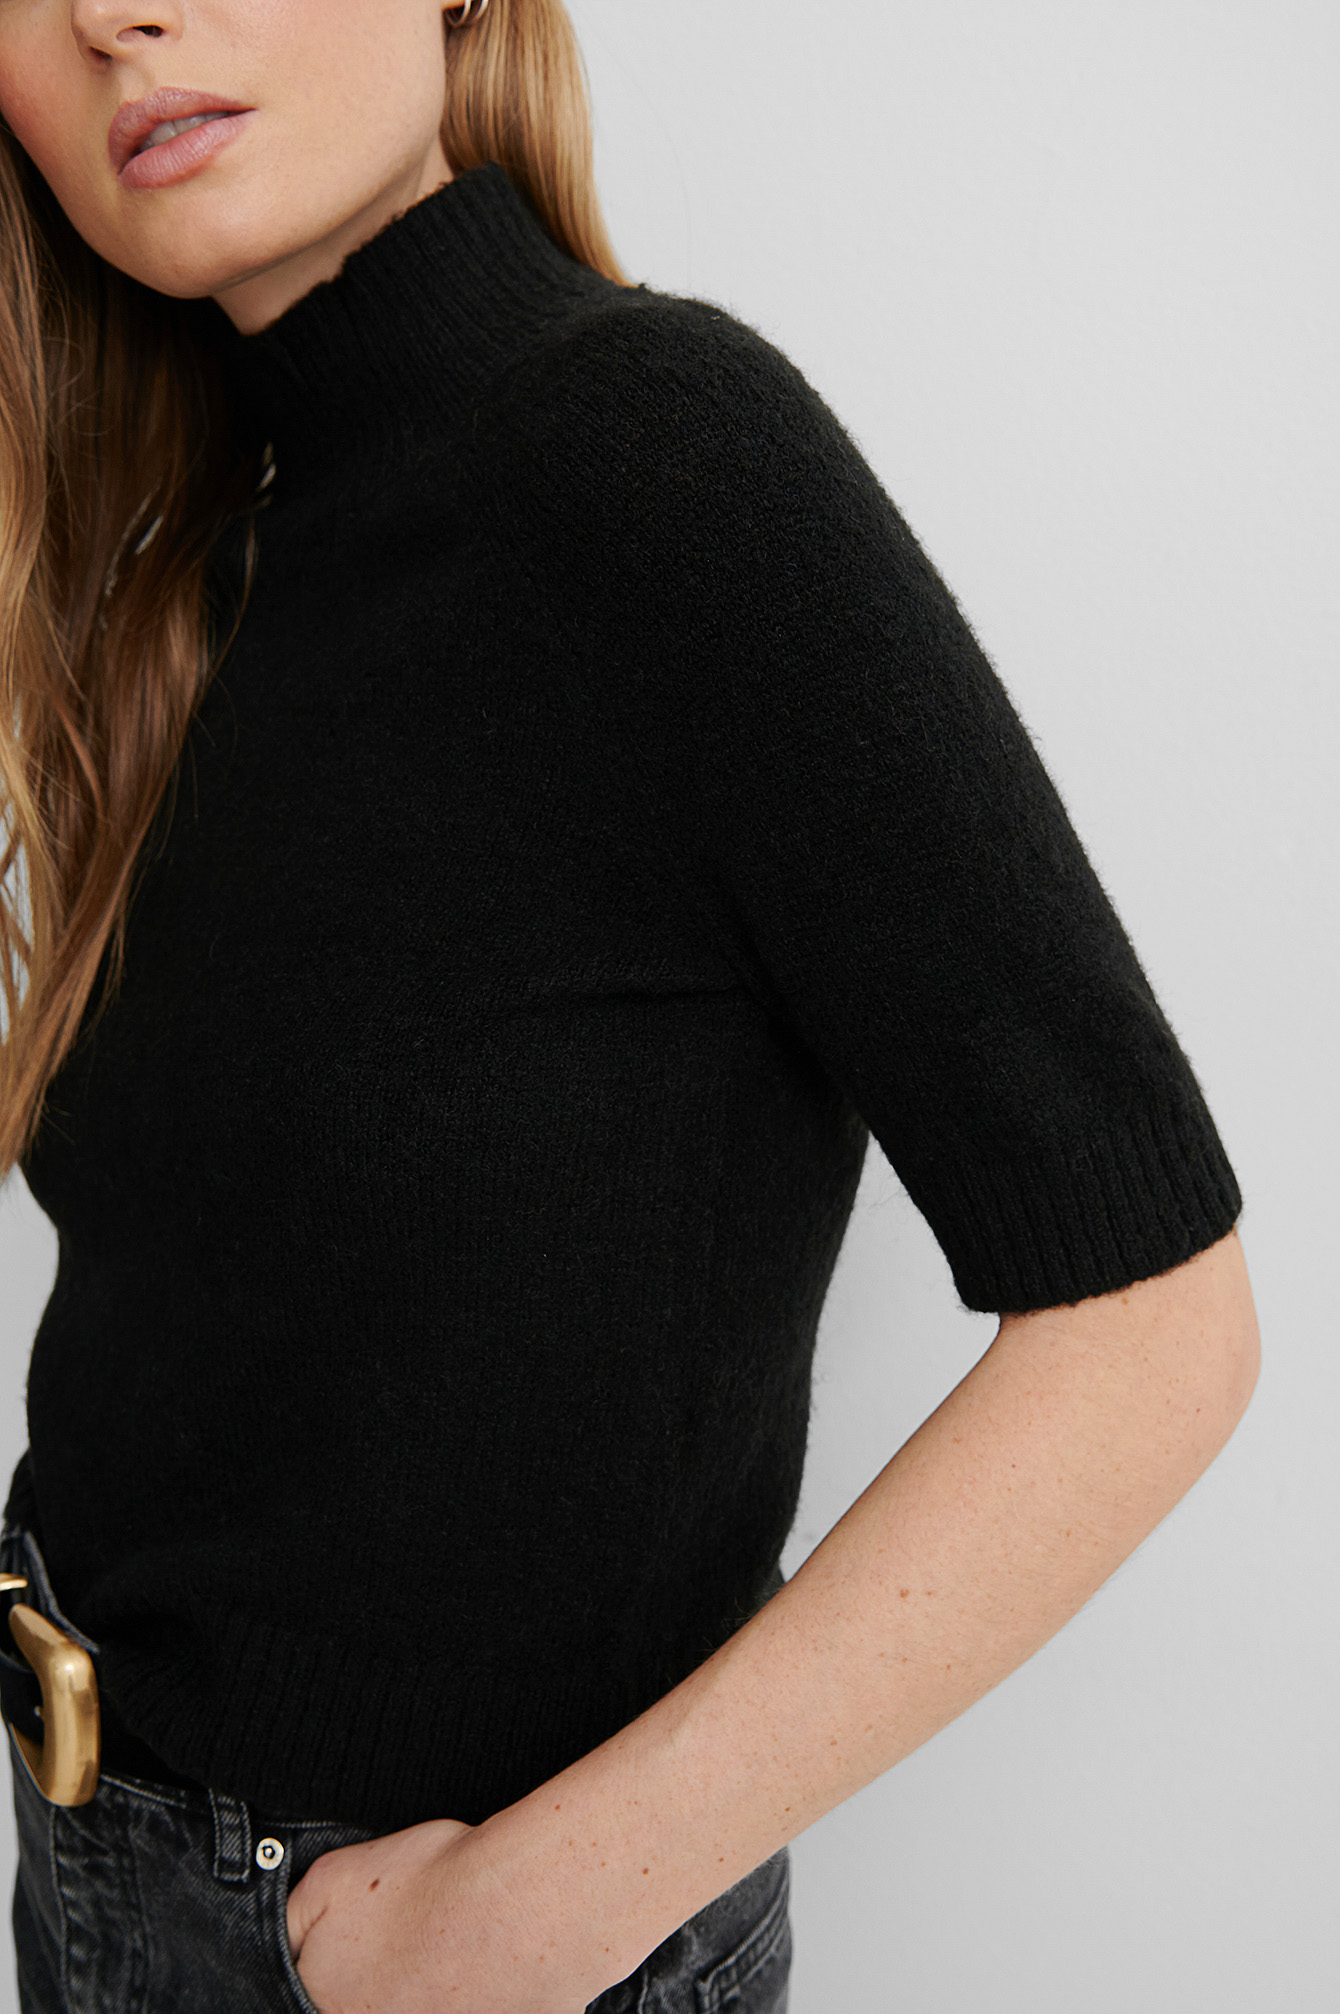 Black Short Sleeve High Neck Knitted Sweater